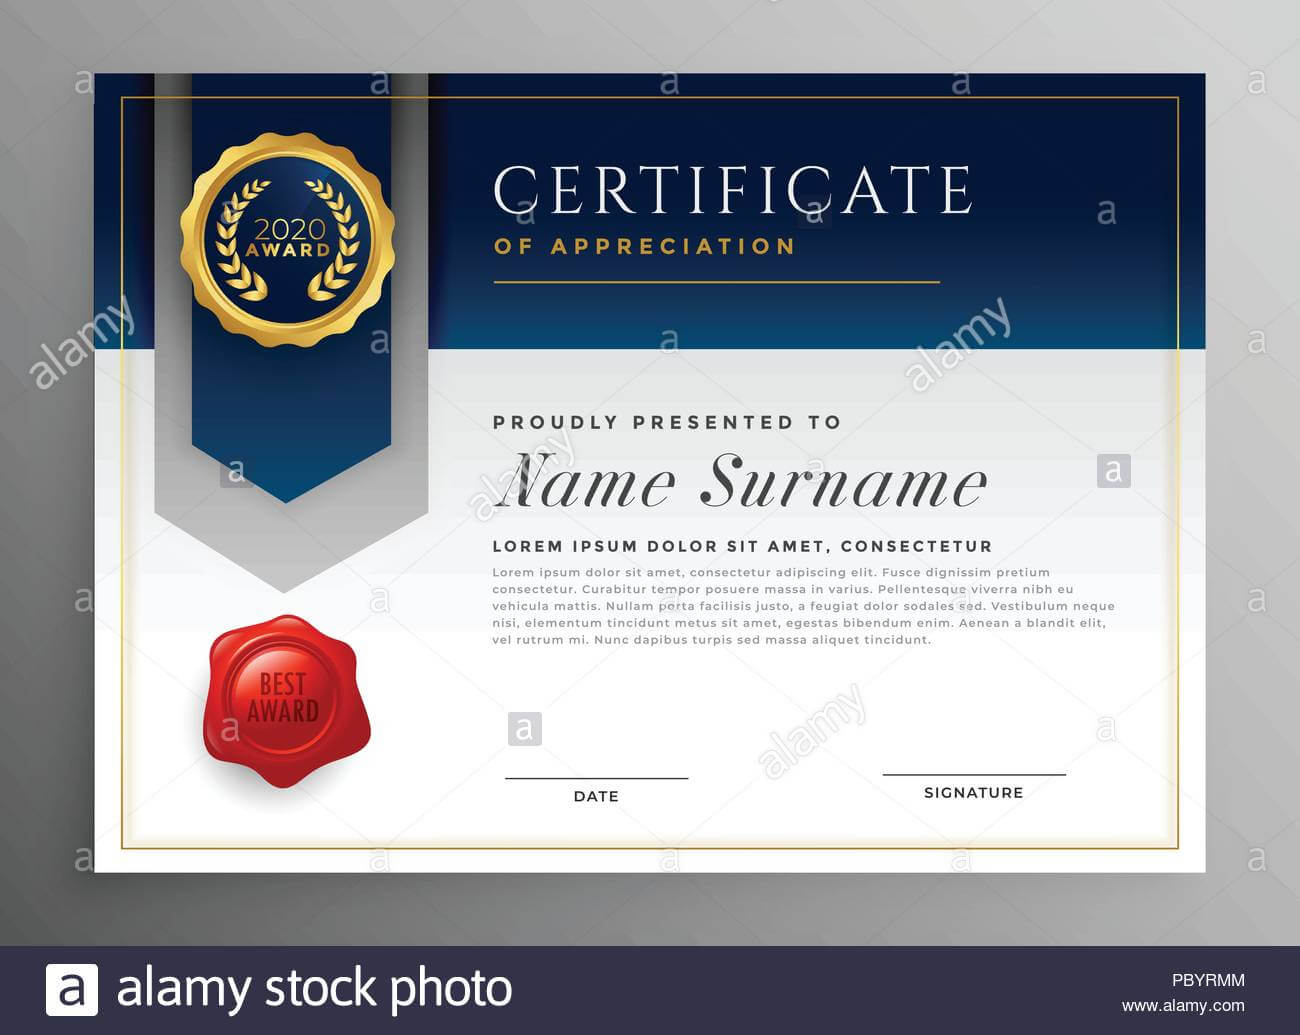 Professional Blue Certificate Template Design Stock Vector Pertaining To Professional Award Certificate Template